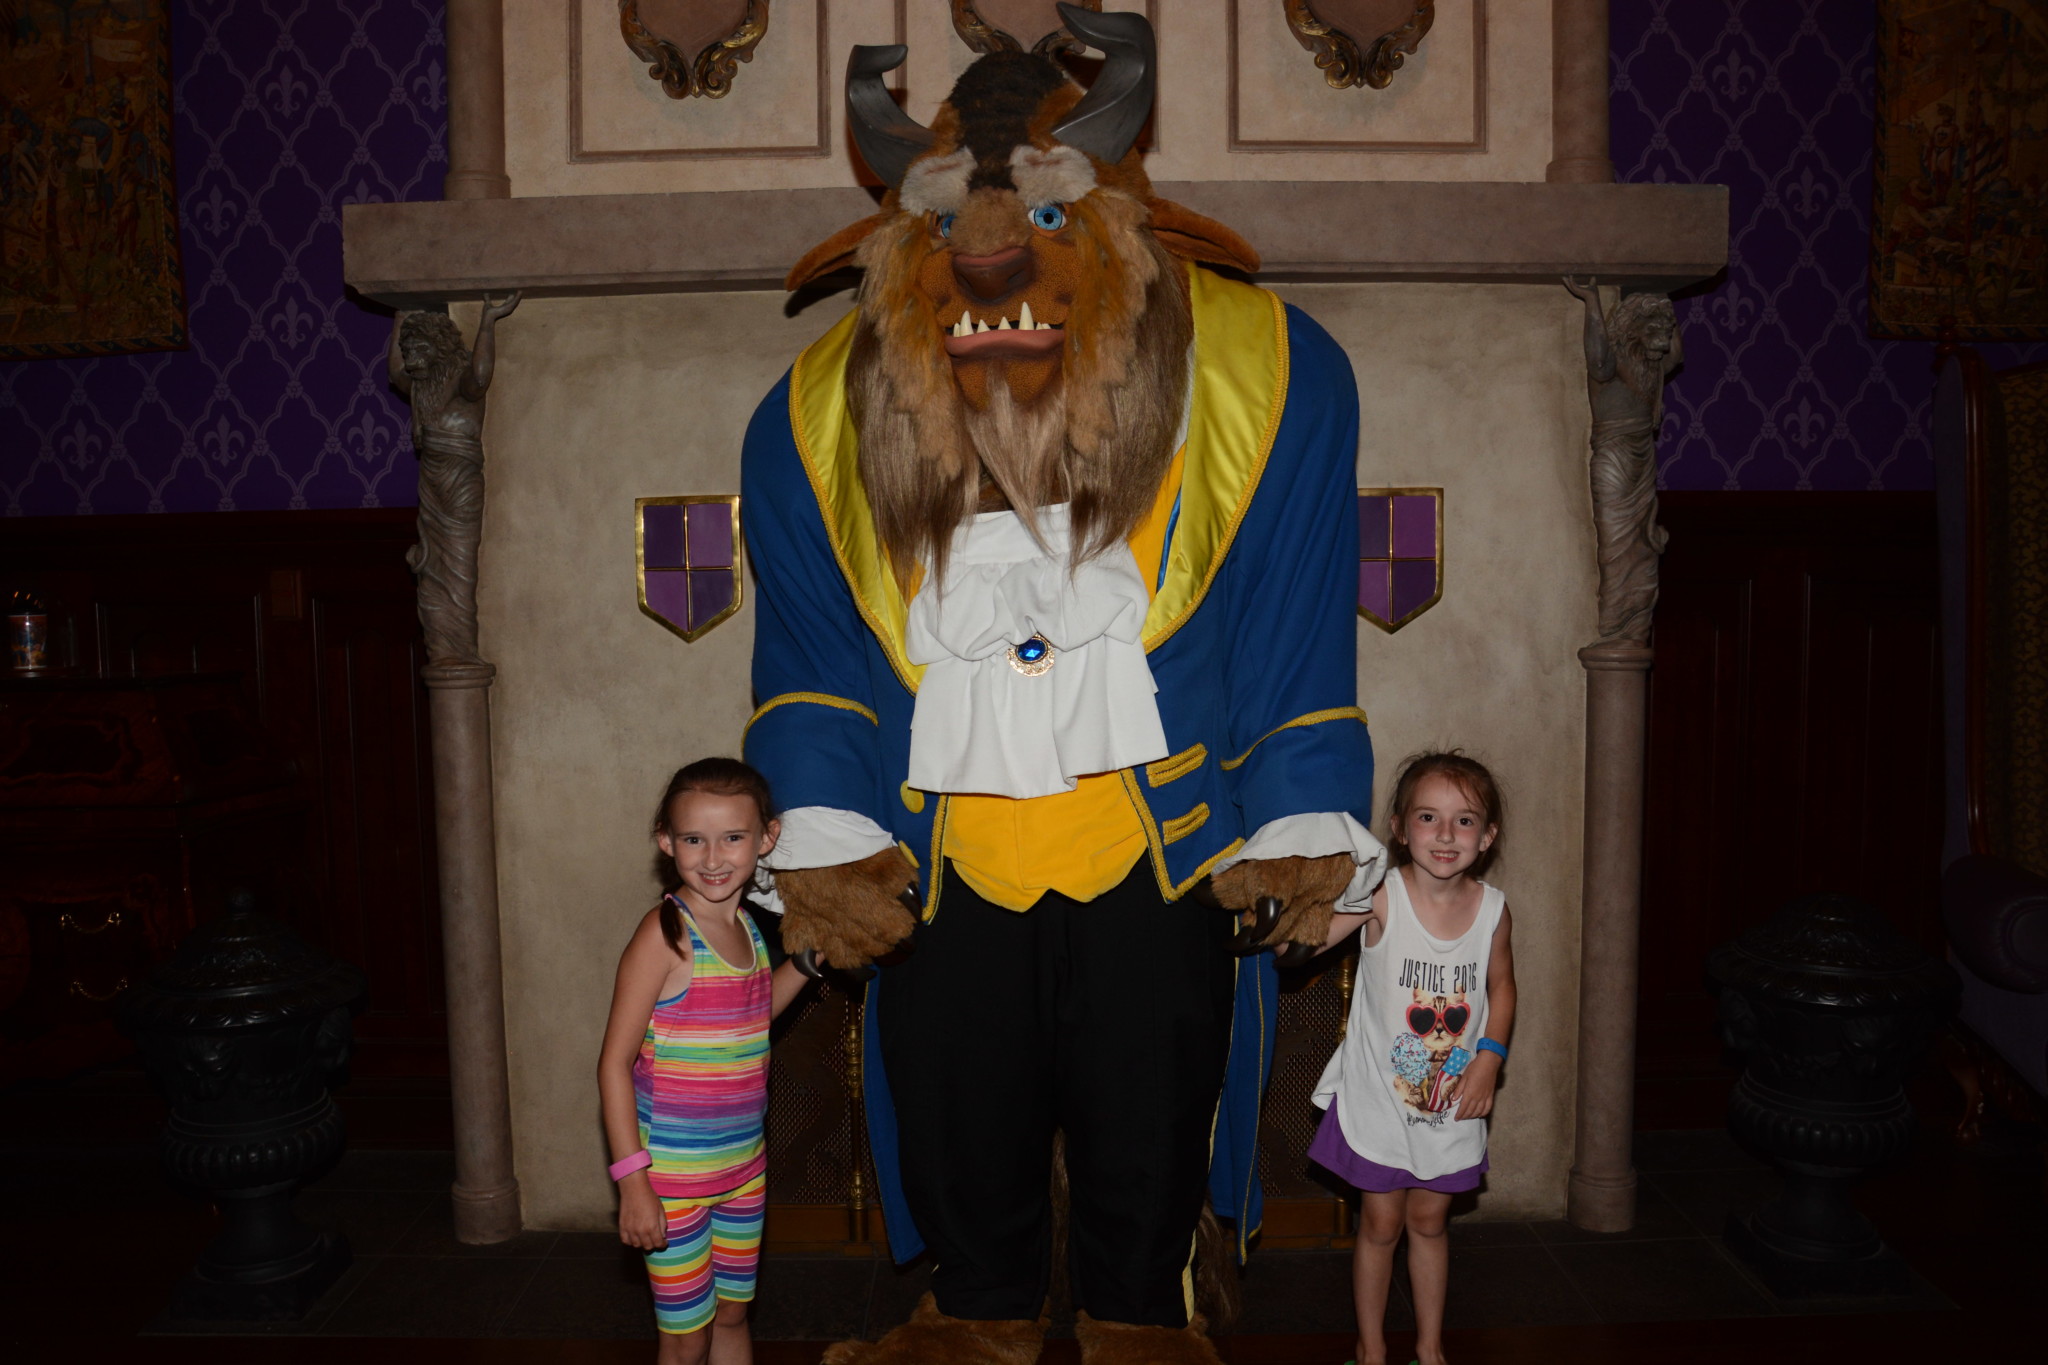 Posing with Beast at Be Our Guest